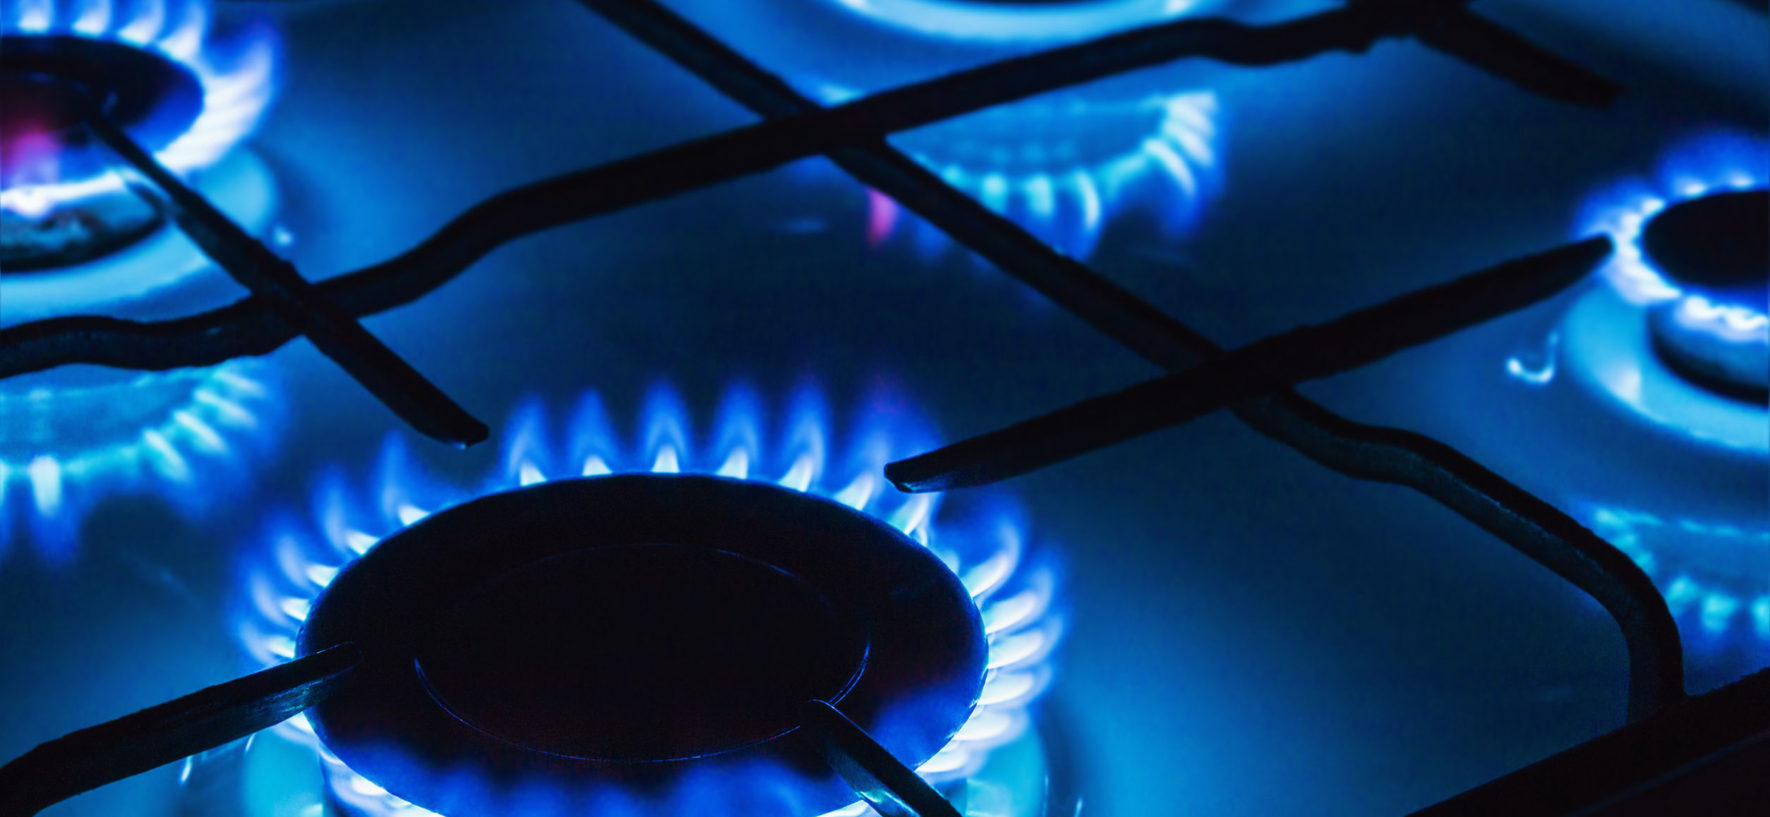 Are propane stoves a good choice for the environment?